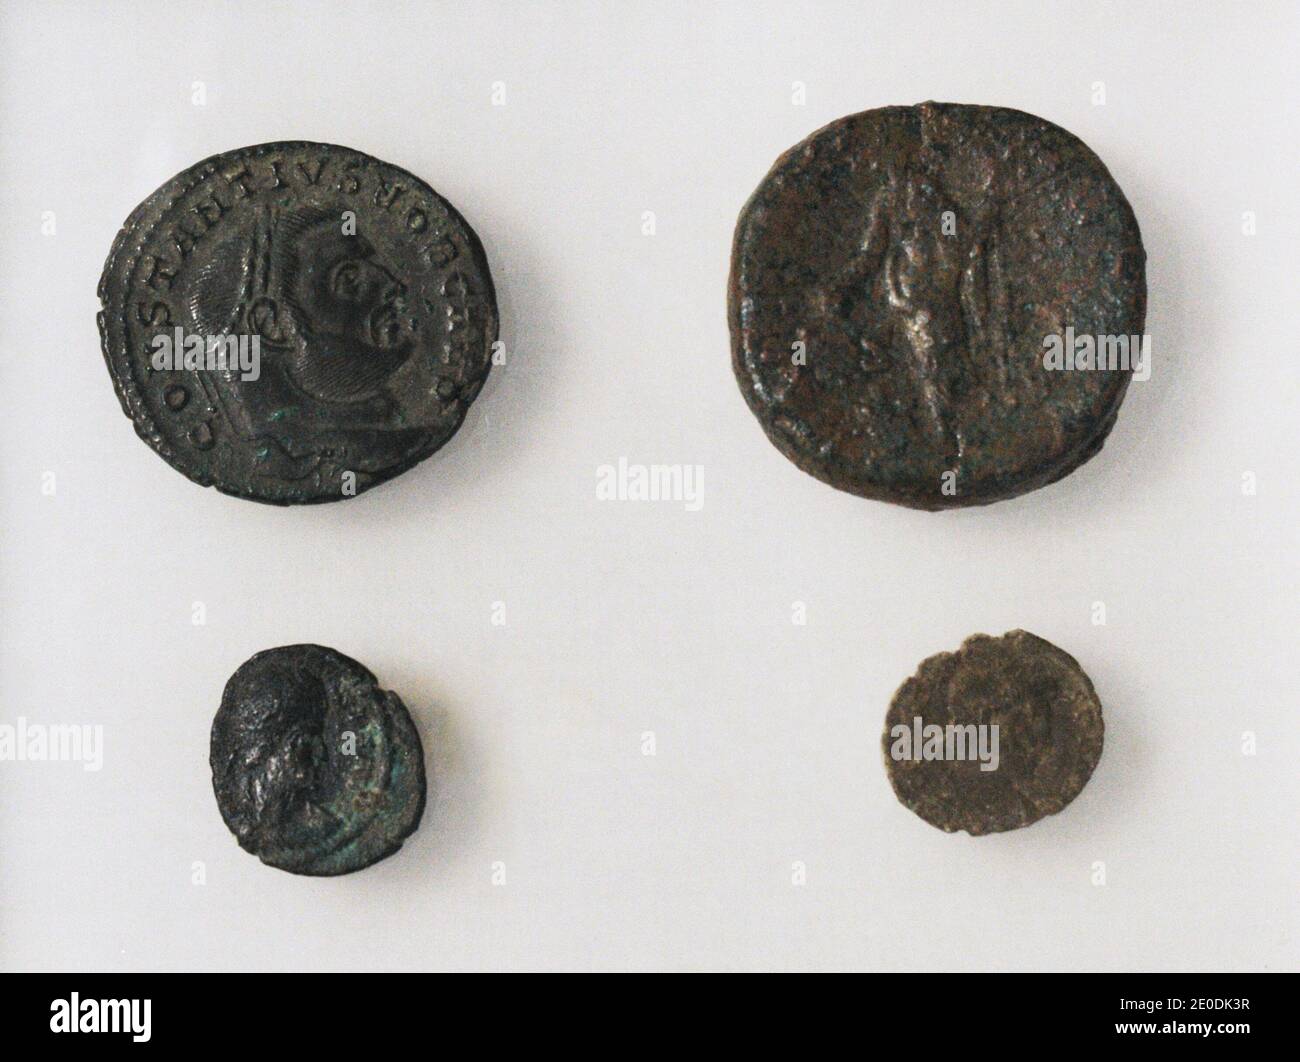 Roman coins (83-348 AD). From the Tower of Hércules, La Coruña, Galicia, Spain. Archaeological and History Museum (San Anton Castle). A Coruña, Galicia, Spain. Stock Photo